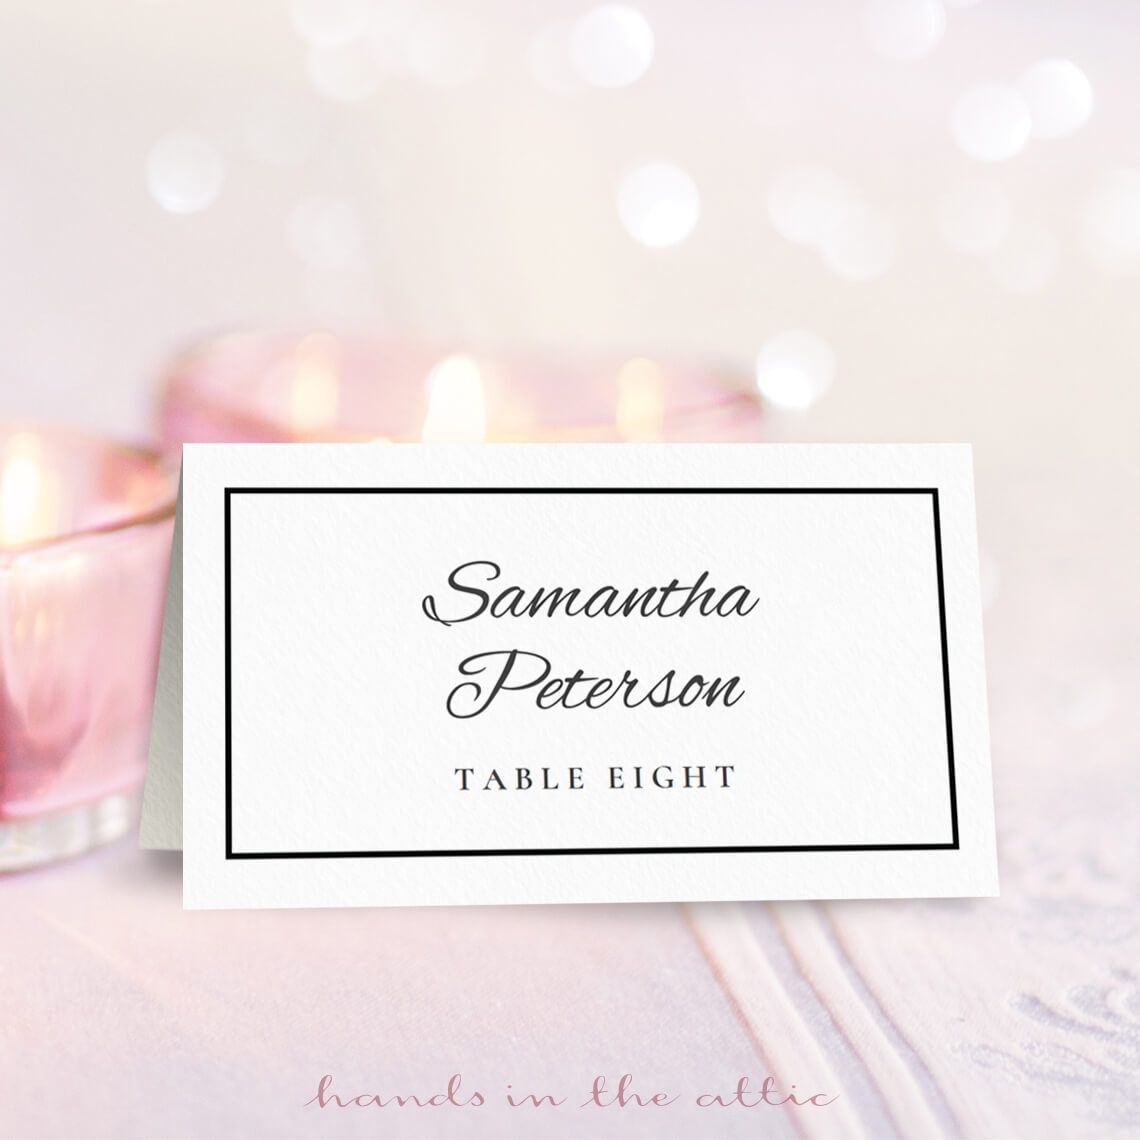 013 Free Place Card Template Templates Word Excellent Ideas With Regard To Ms Word Place Card Template